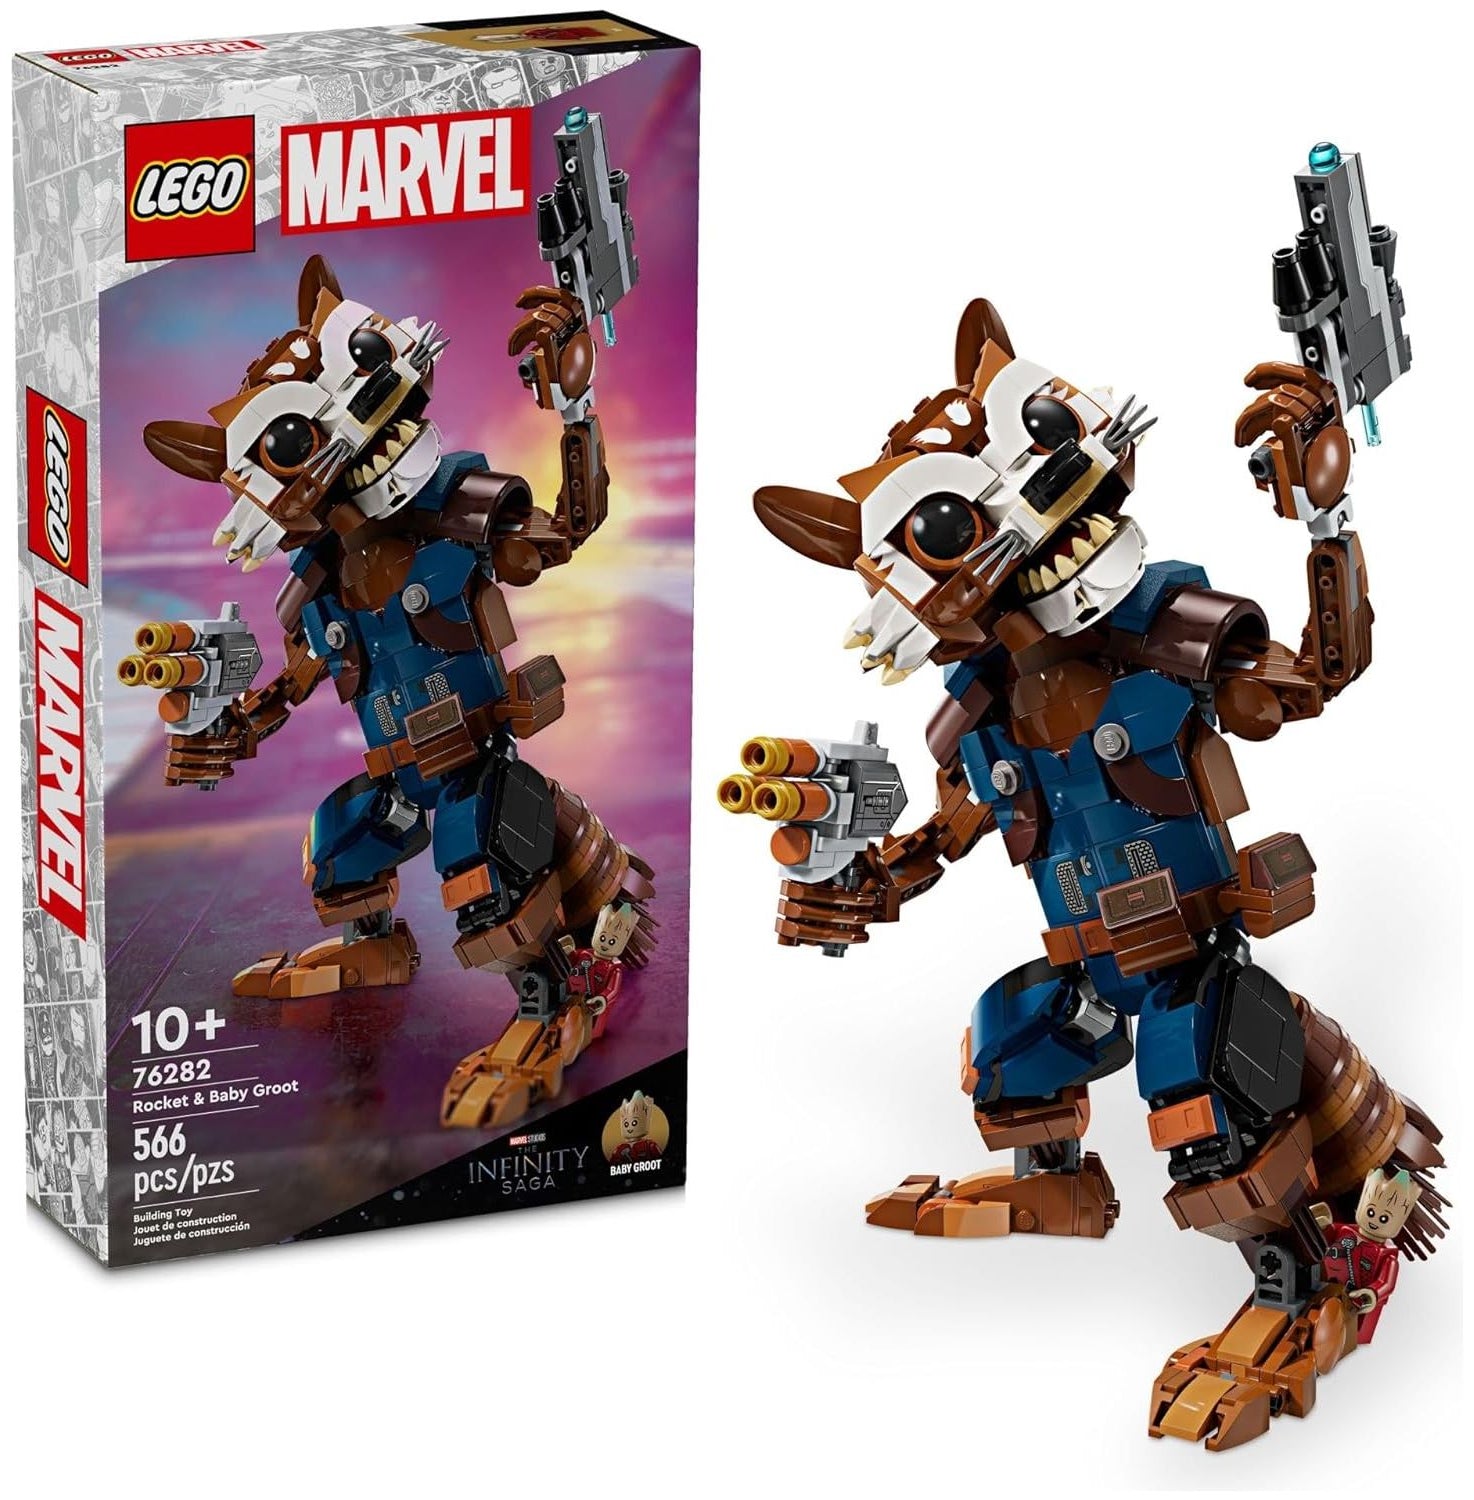 LEGO 76282 Marvel Rocket & Baby Groot Minifigure, Guardians of The Galaxy Inspired Marvel Toy for Kids, Buildable Marvel Action Figure for Play and Display.